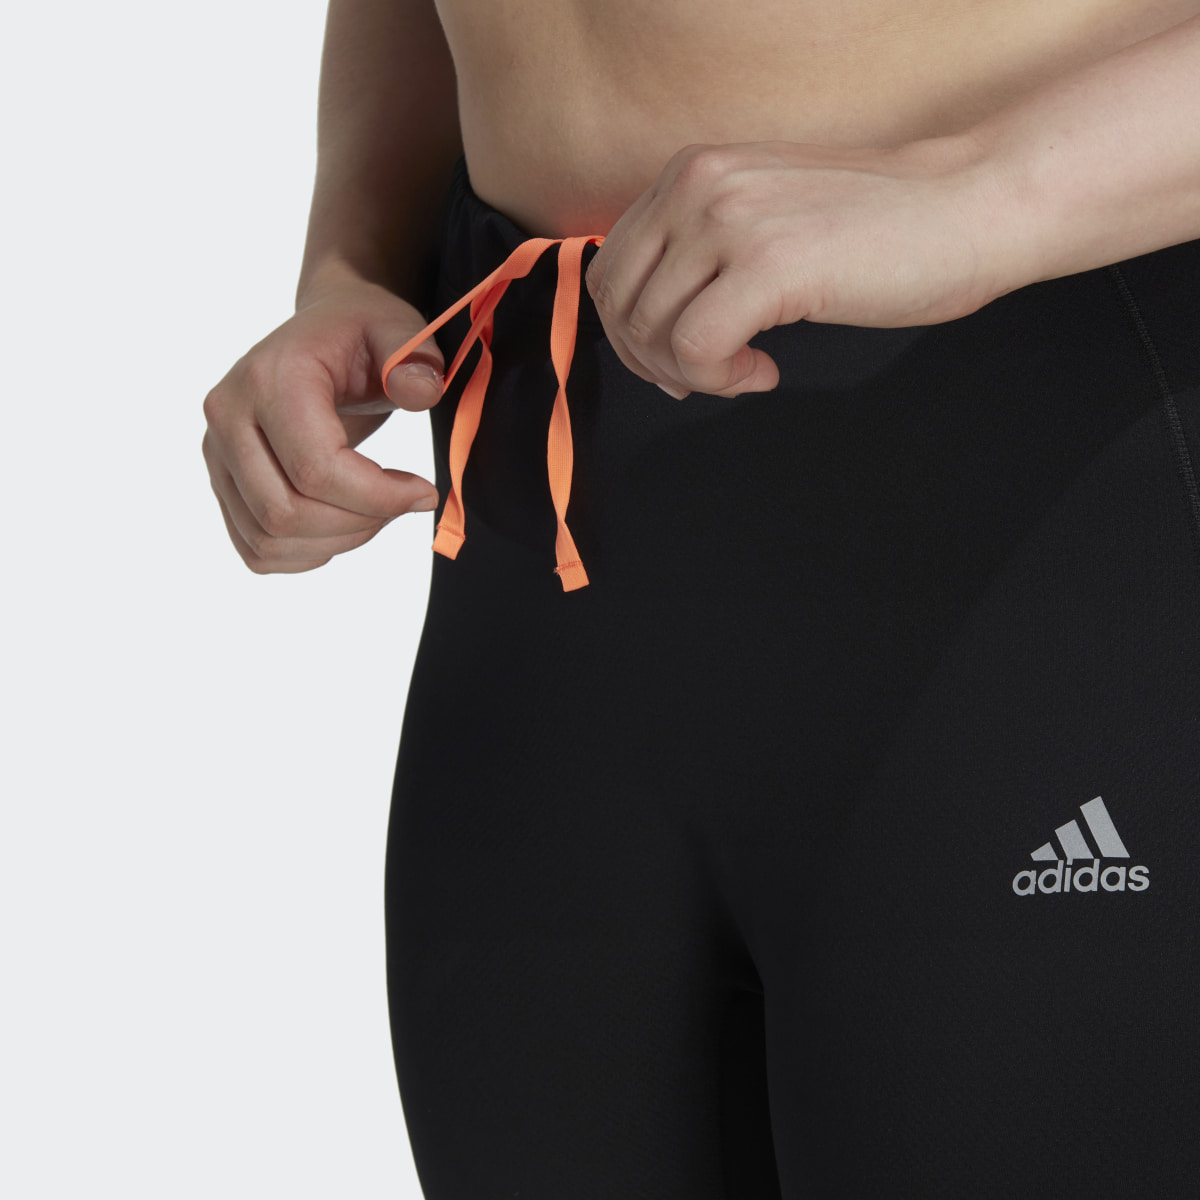 Adidas FastImpact COLD.RDY Winter Running Long Leggings (Plus Size). 6